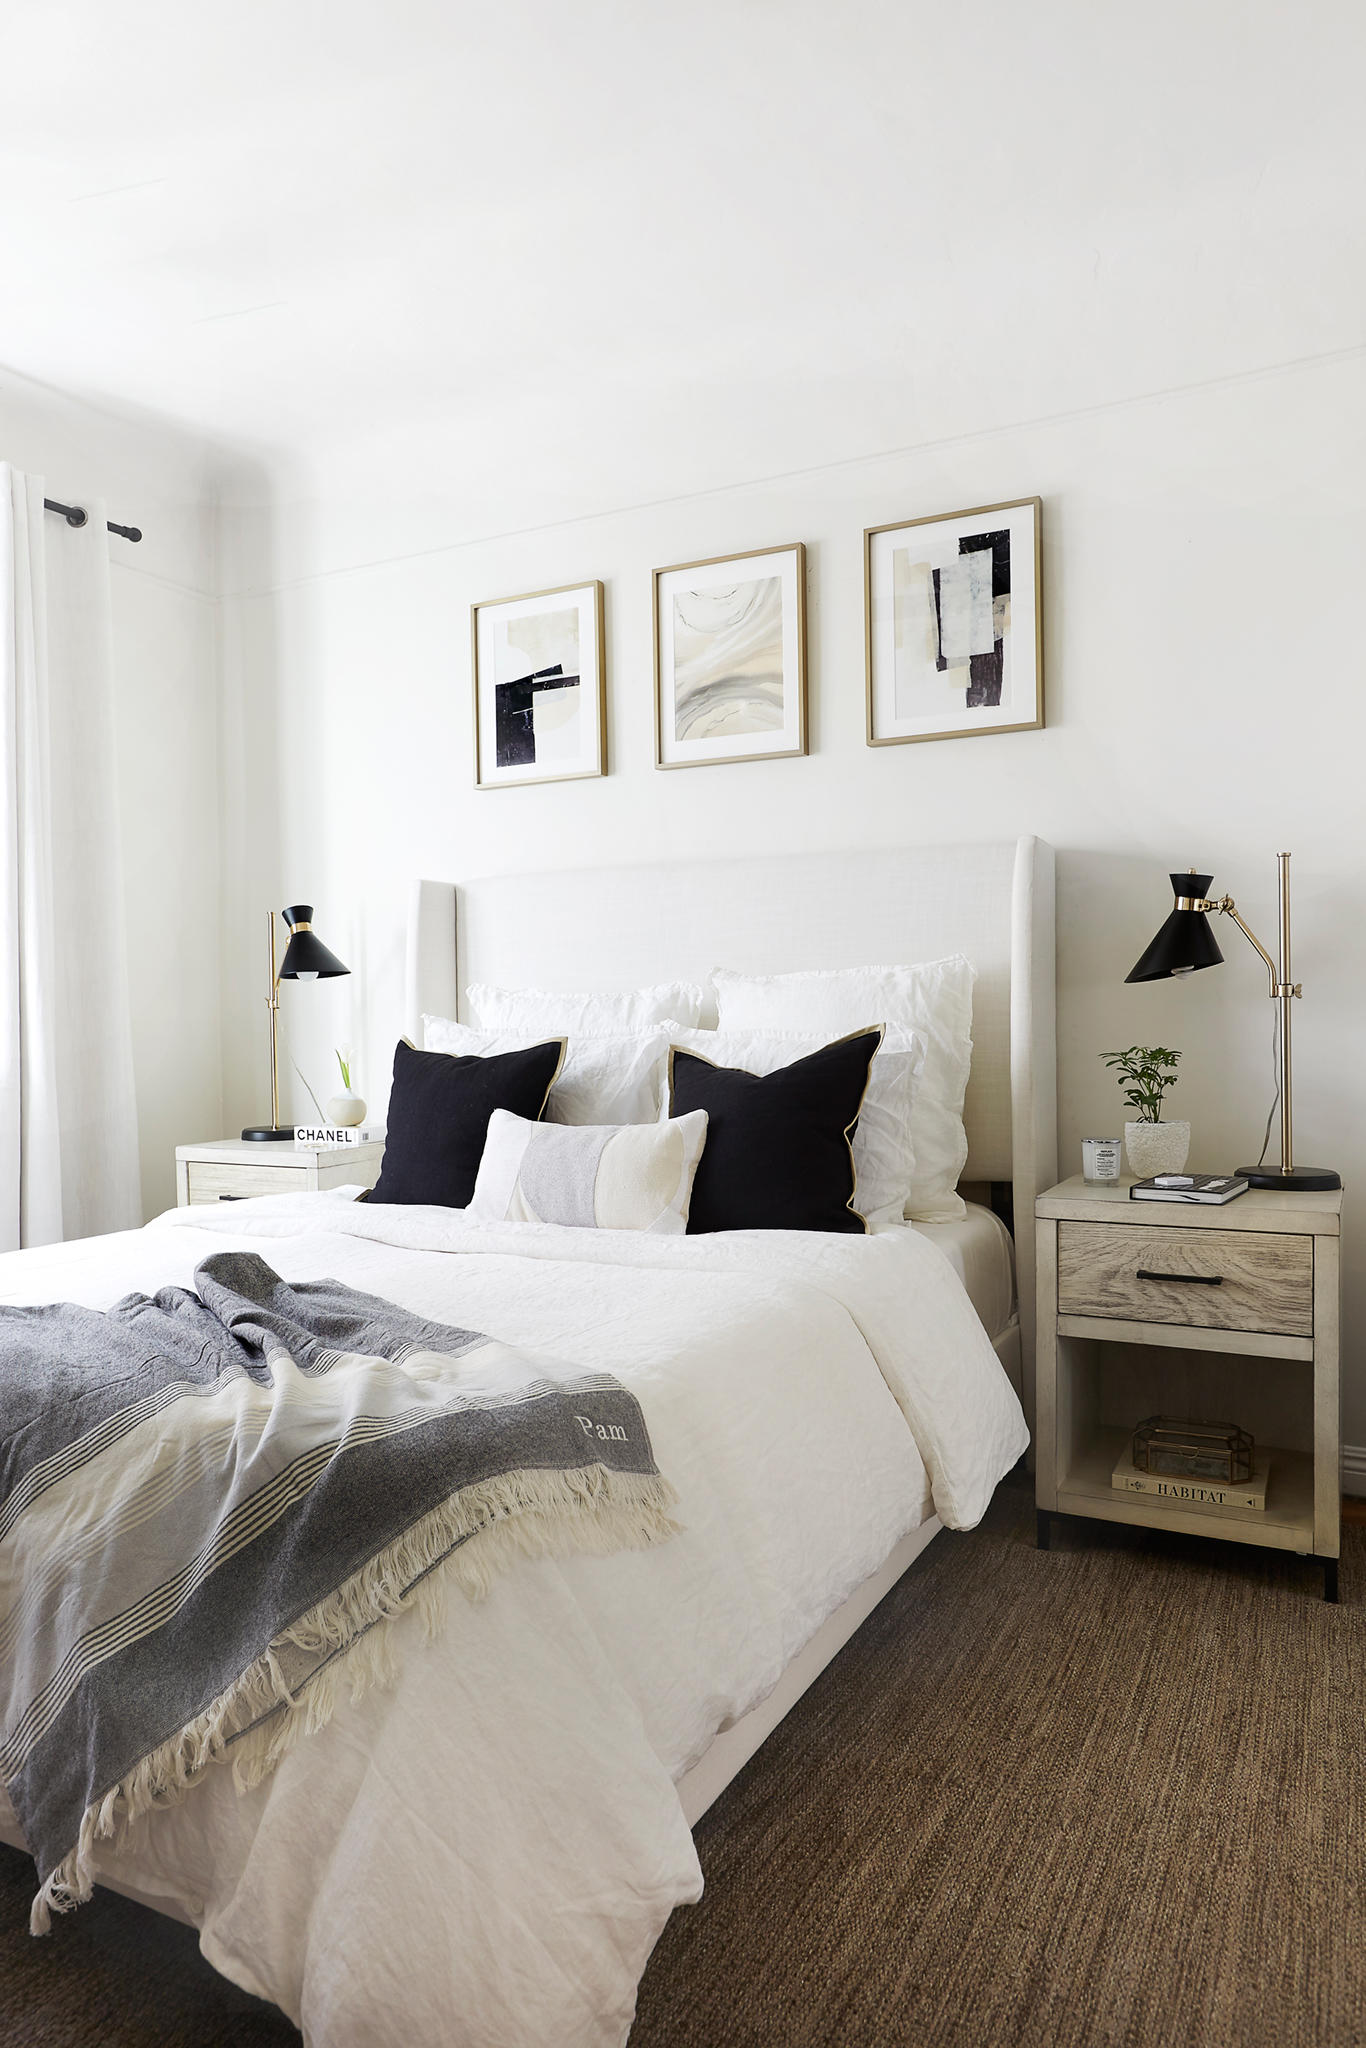 5 Essential Items for Small Bedrooms by Pam Hetlinger | TheGirlFromPanama | Joss & Main drawer, bright bedroom interior, parachute home bedding, bedroom interior inspiration, bright airy bedroom, fashion blogger bedroom, bright airy bedroom